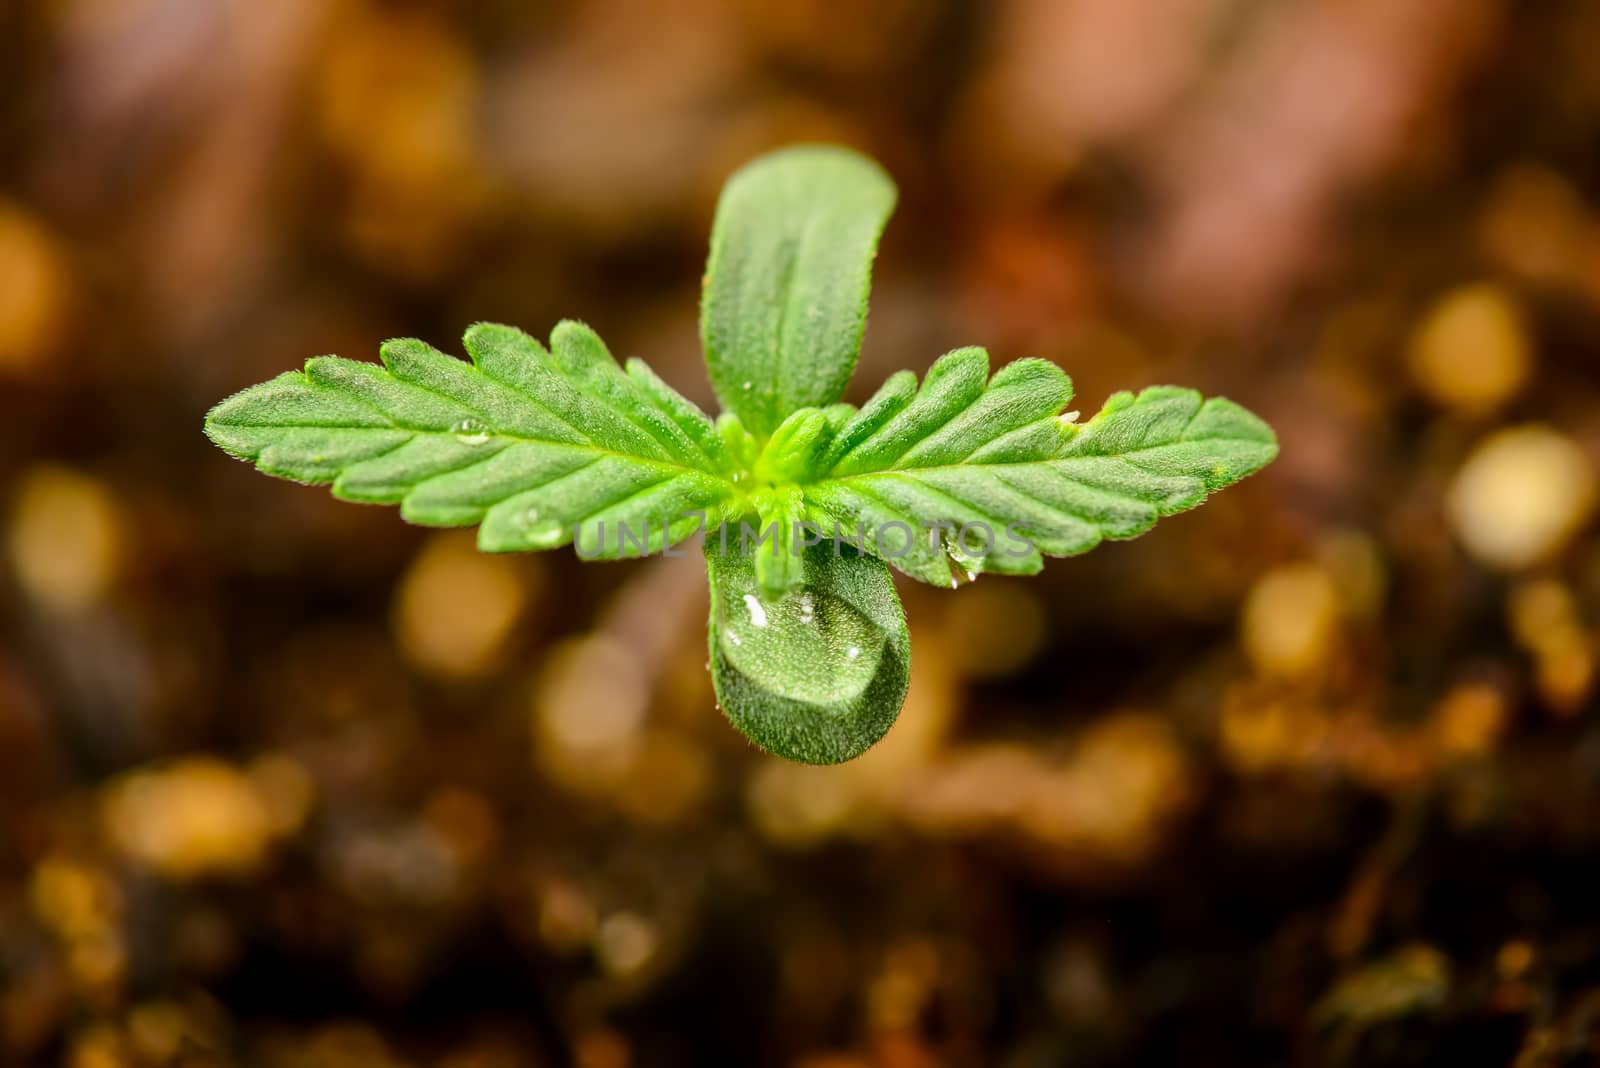 Week Old Medical Marijuana Plant stretching out for the first time